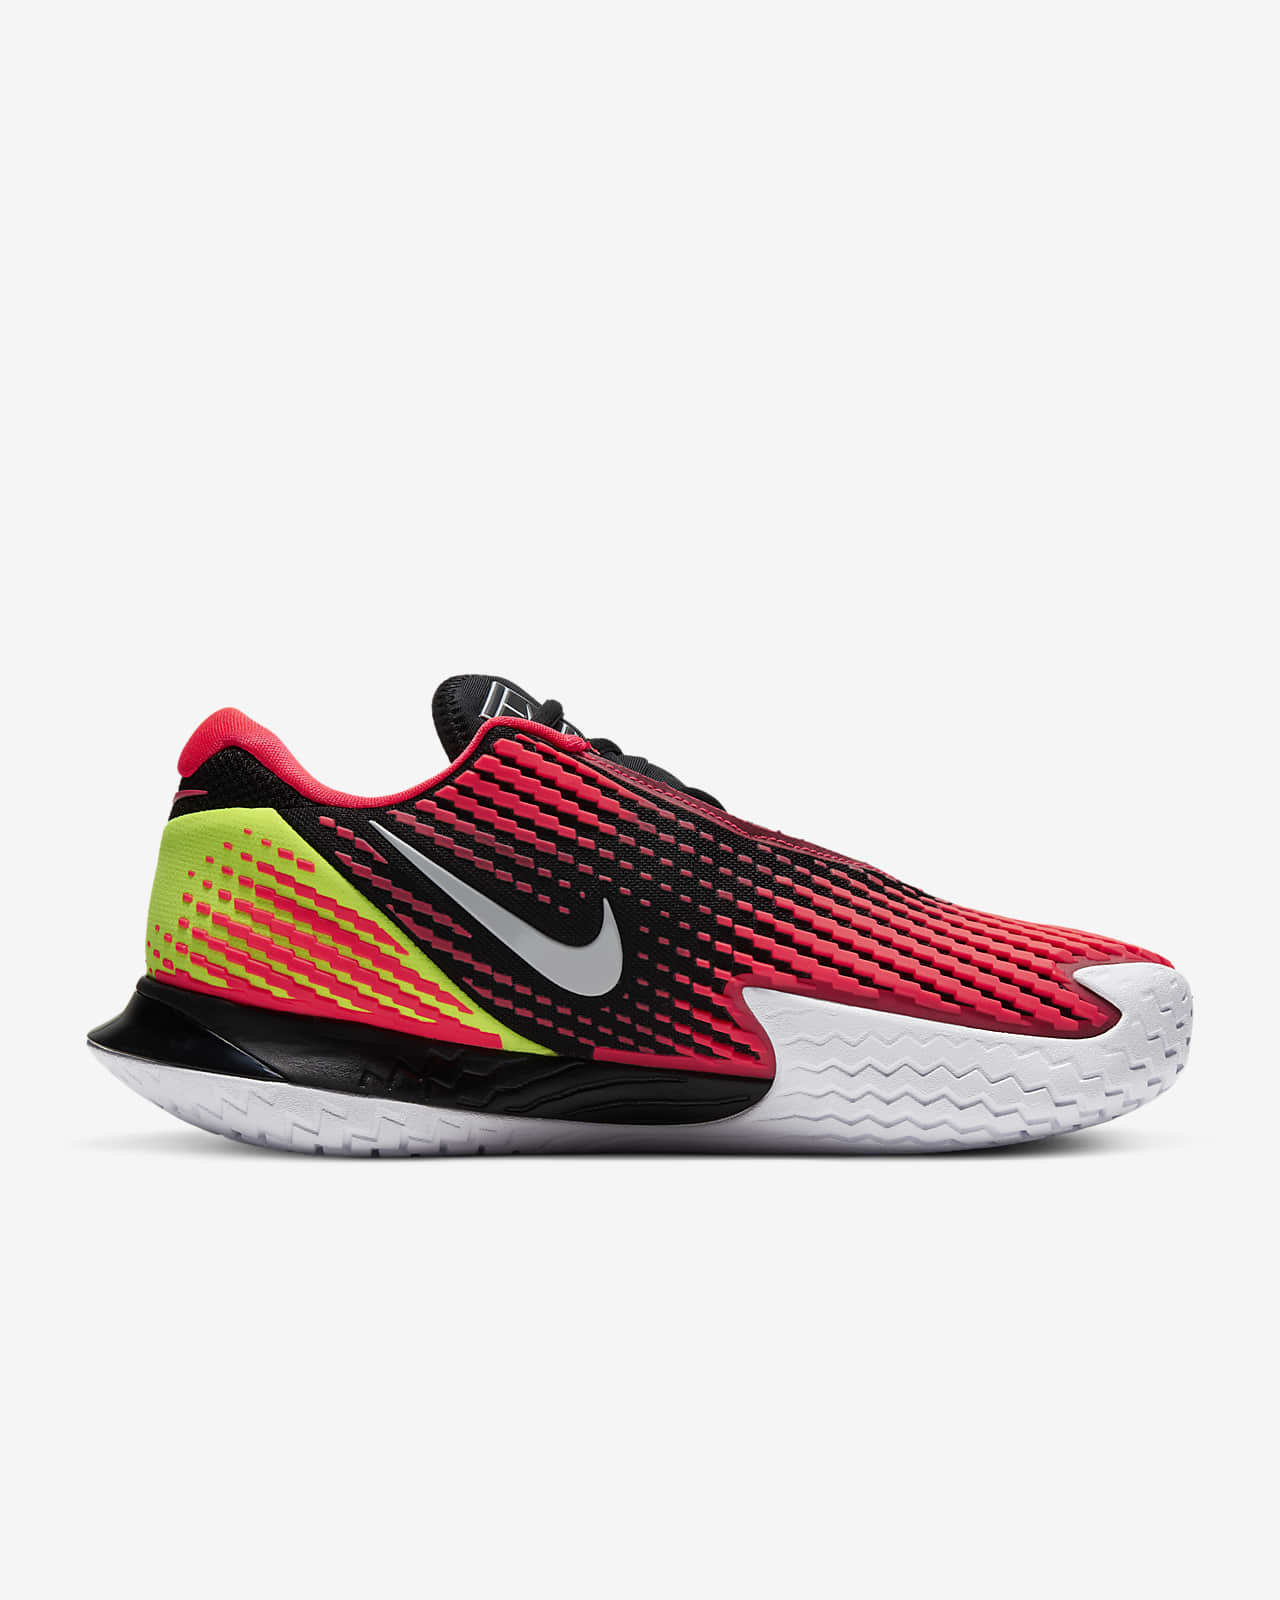 nike cage tennis shoes mens